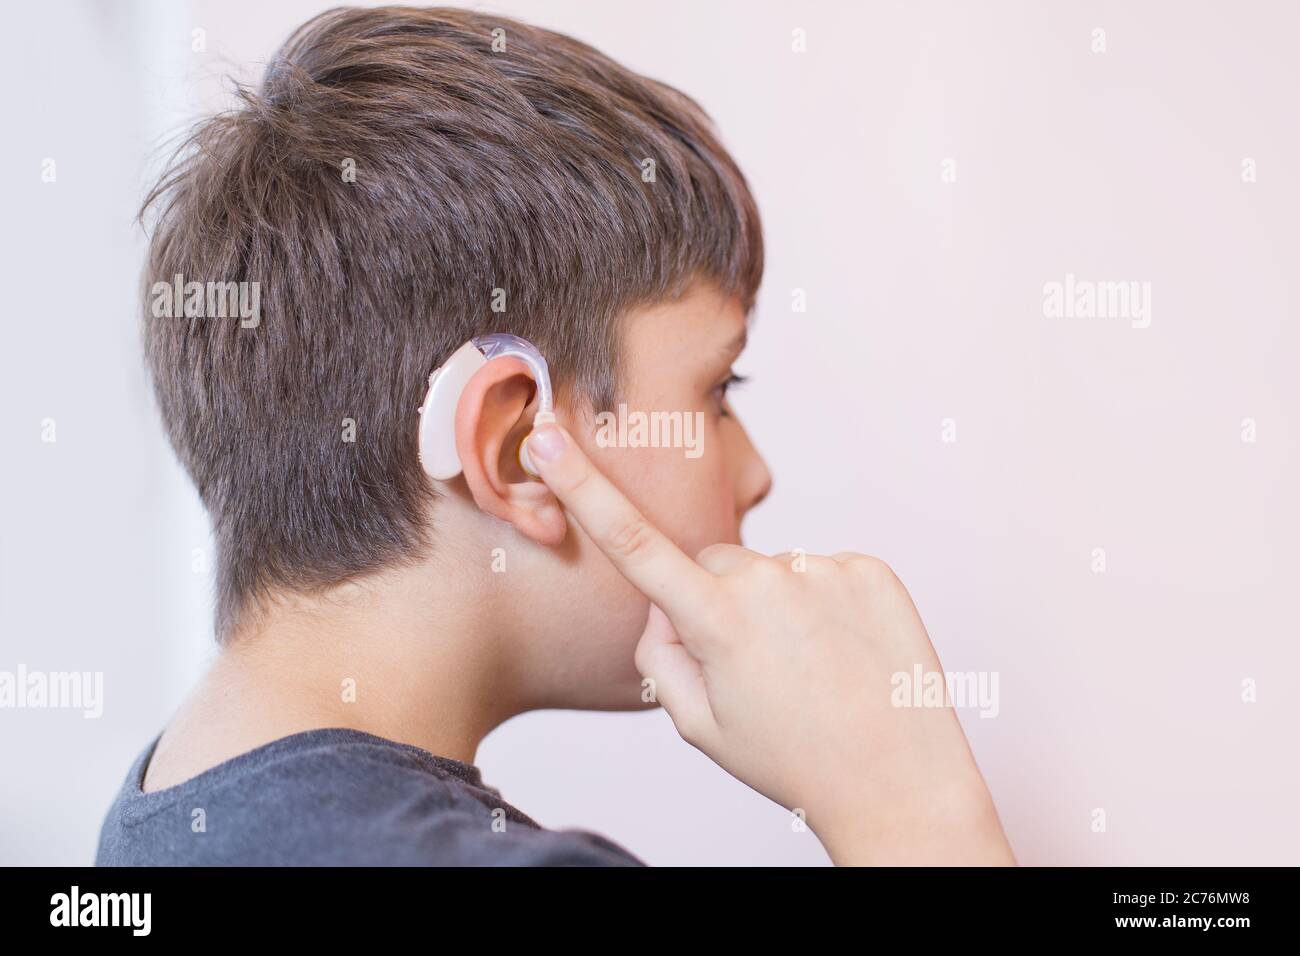 young boy with hearing aid Stock Photo